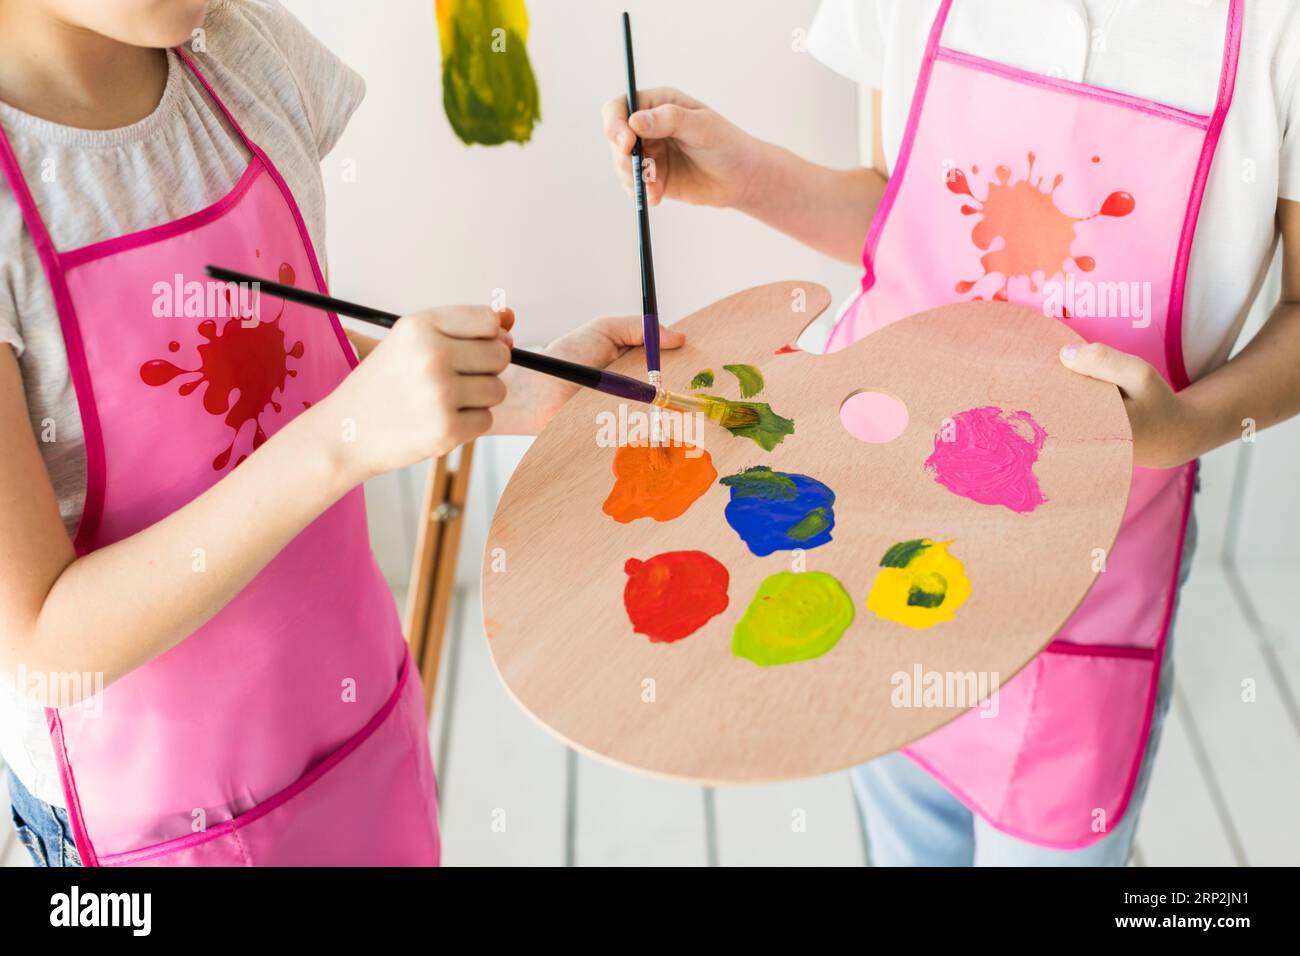 Paint brush with wooden handle and dab of pink paint Stock Illustration by  ©vanazi #27605605